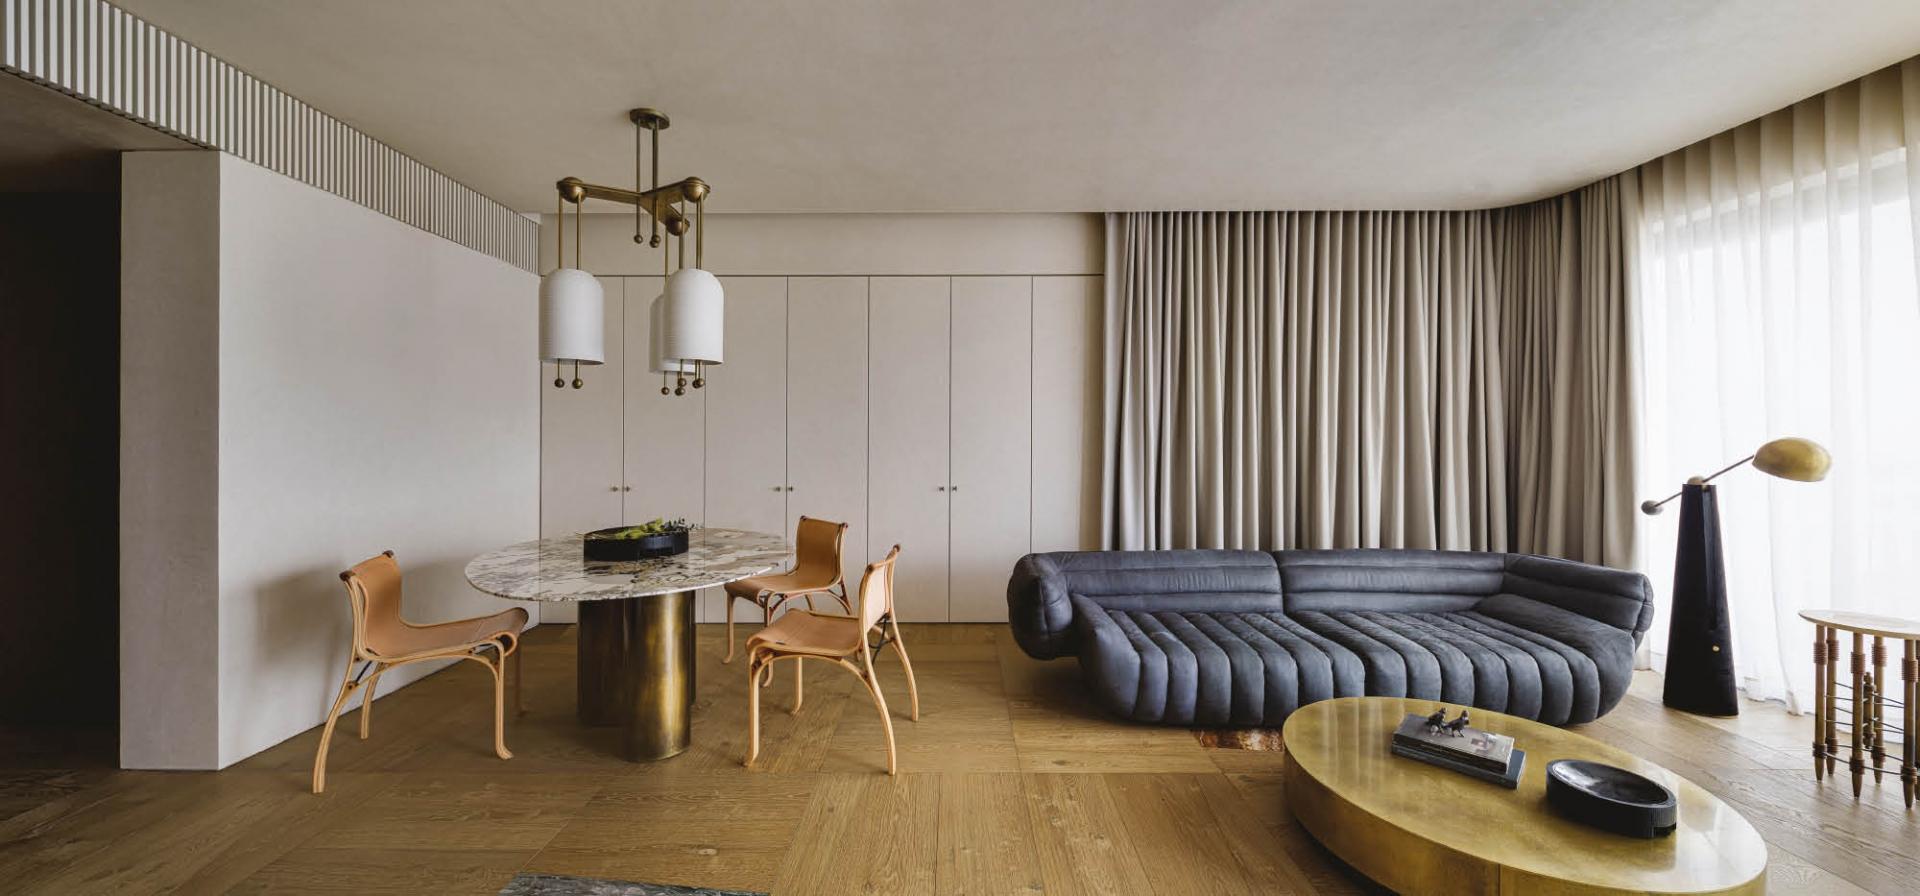 Step Inside a Hong Kong Residence Inspired by the Japanese Philosophy of Wabi-sabi